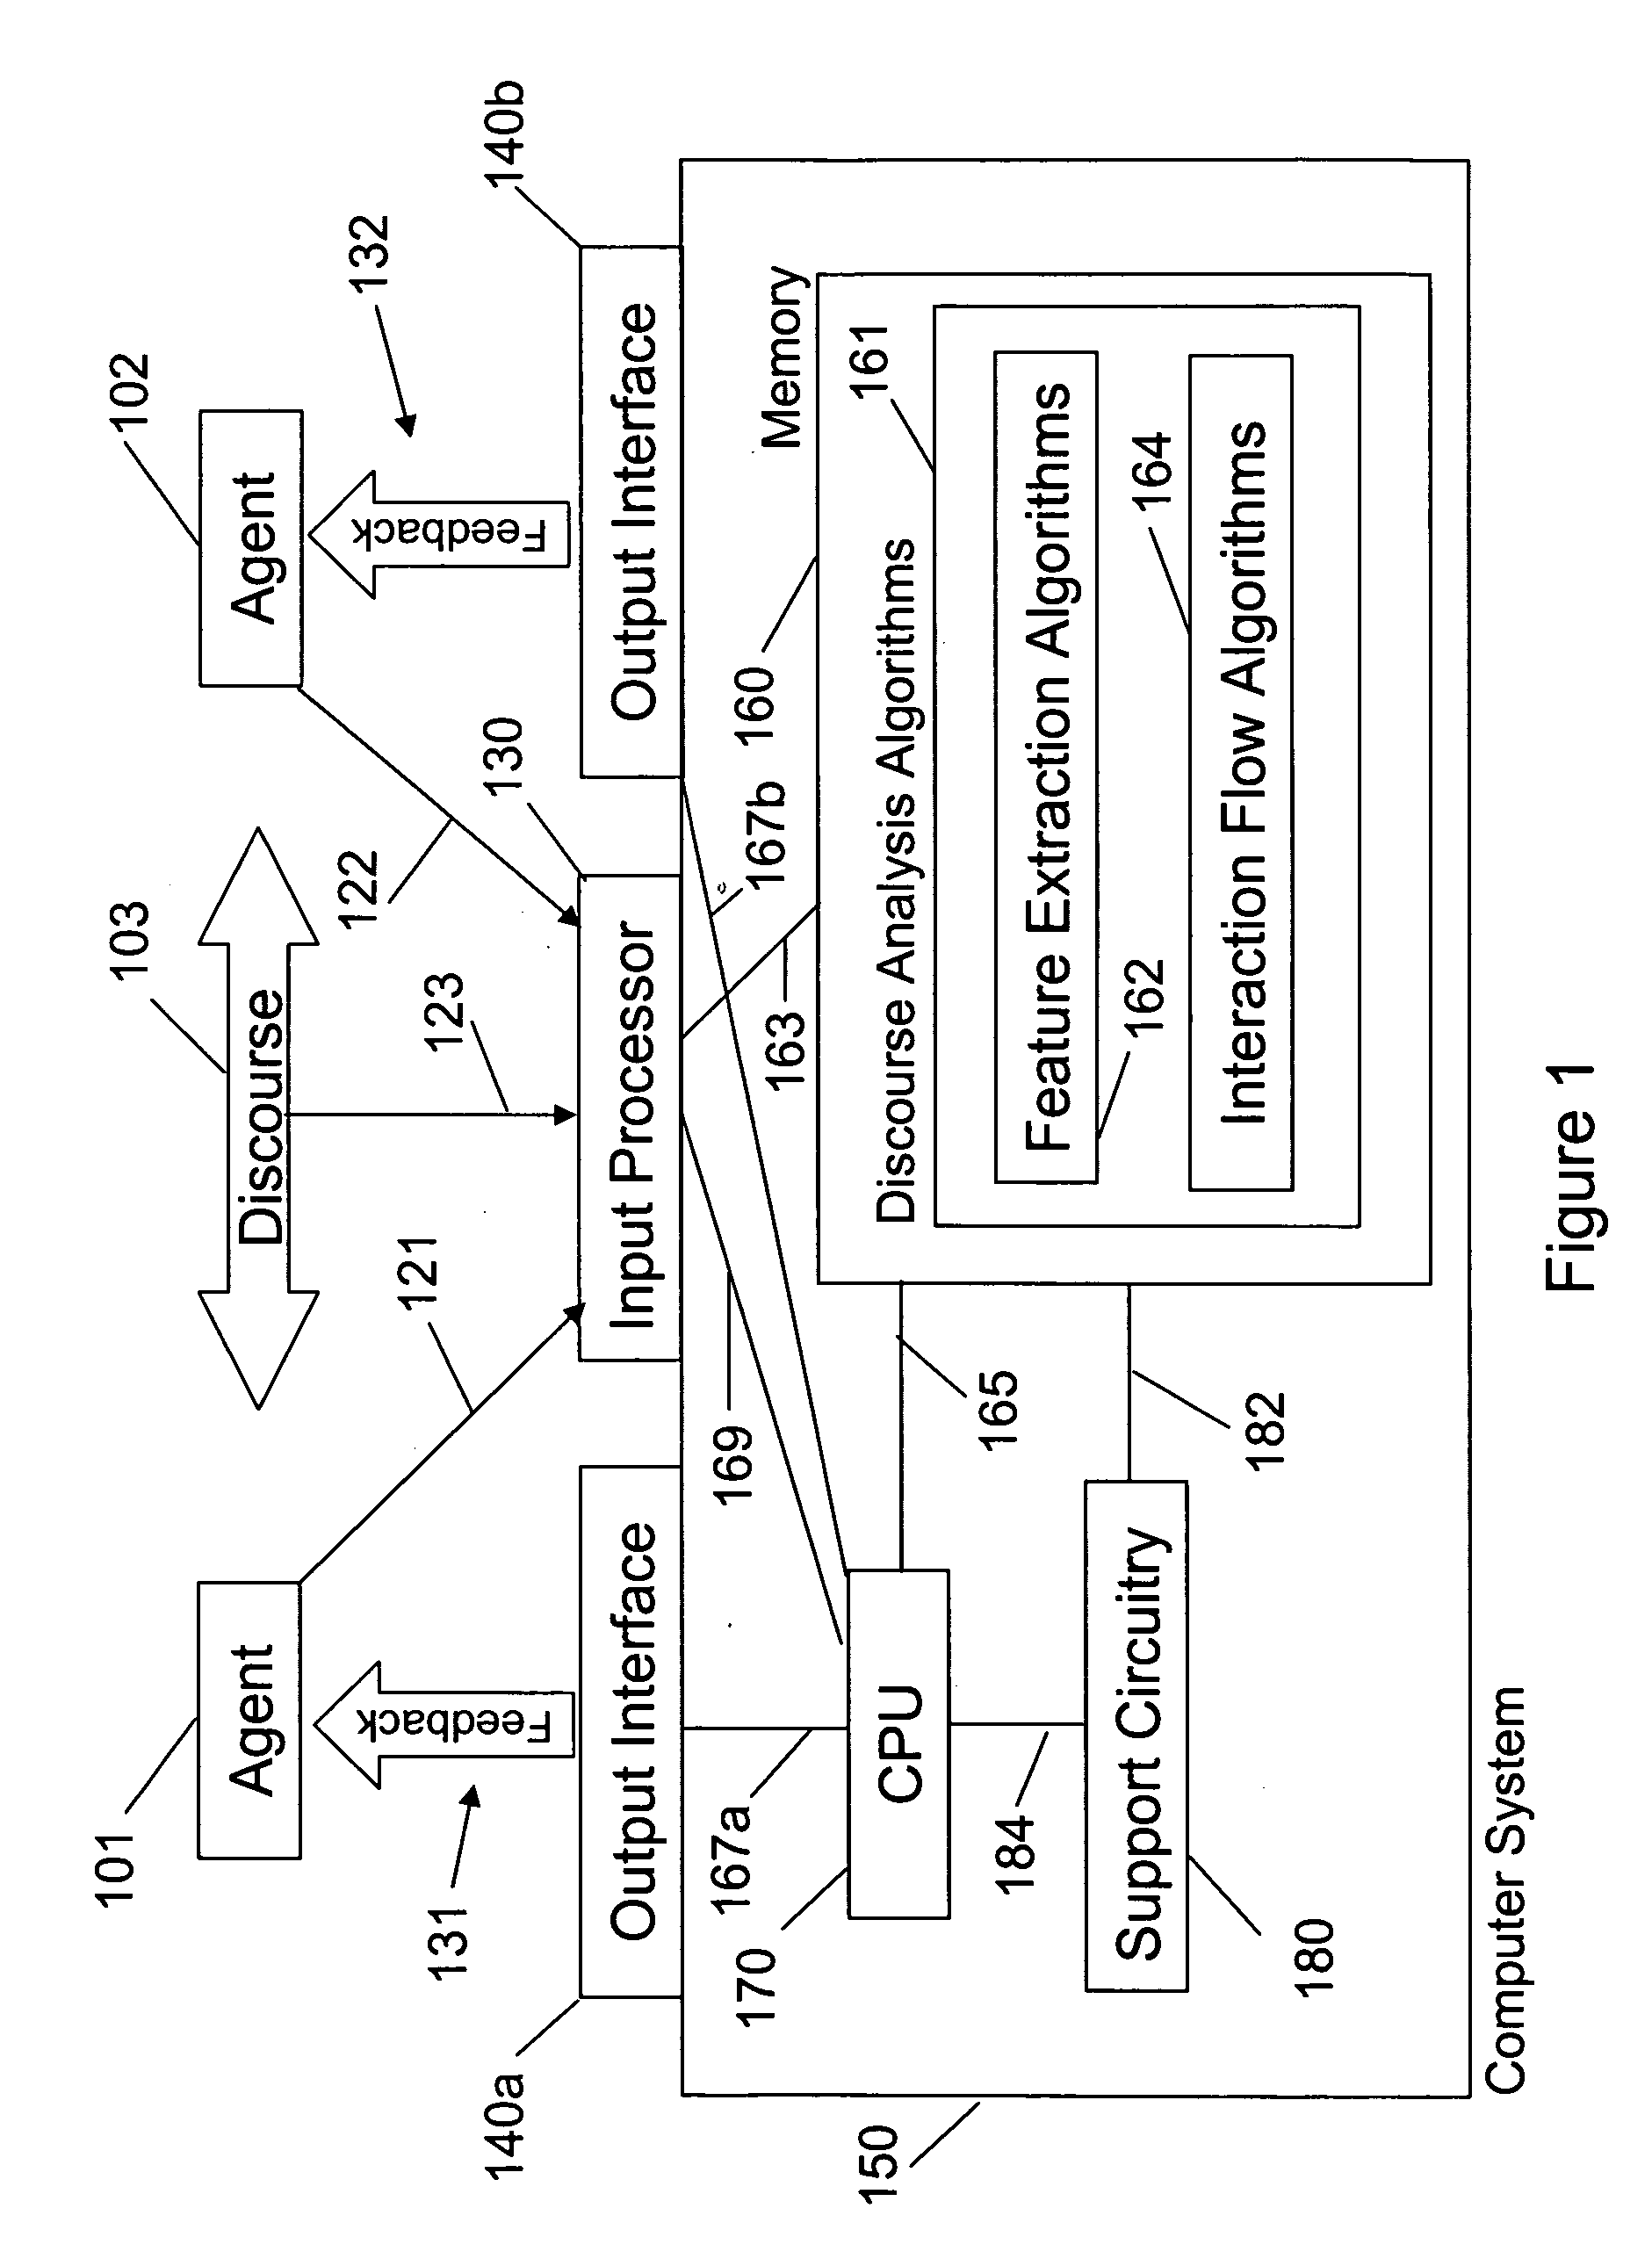 System and method for analyzing and improving a discourse engaged in by a number of interacting agents